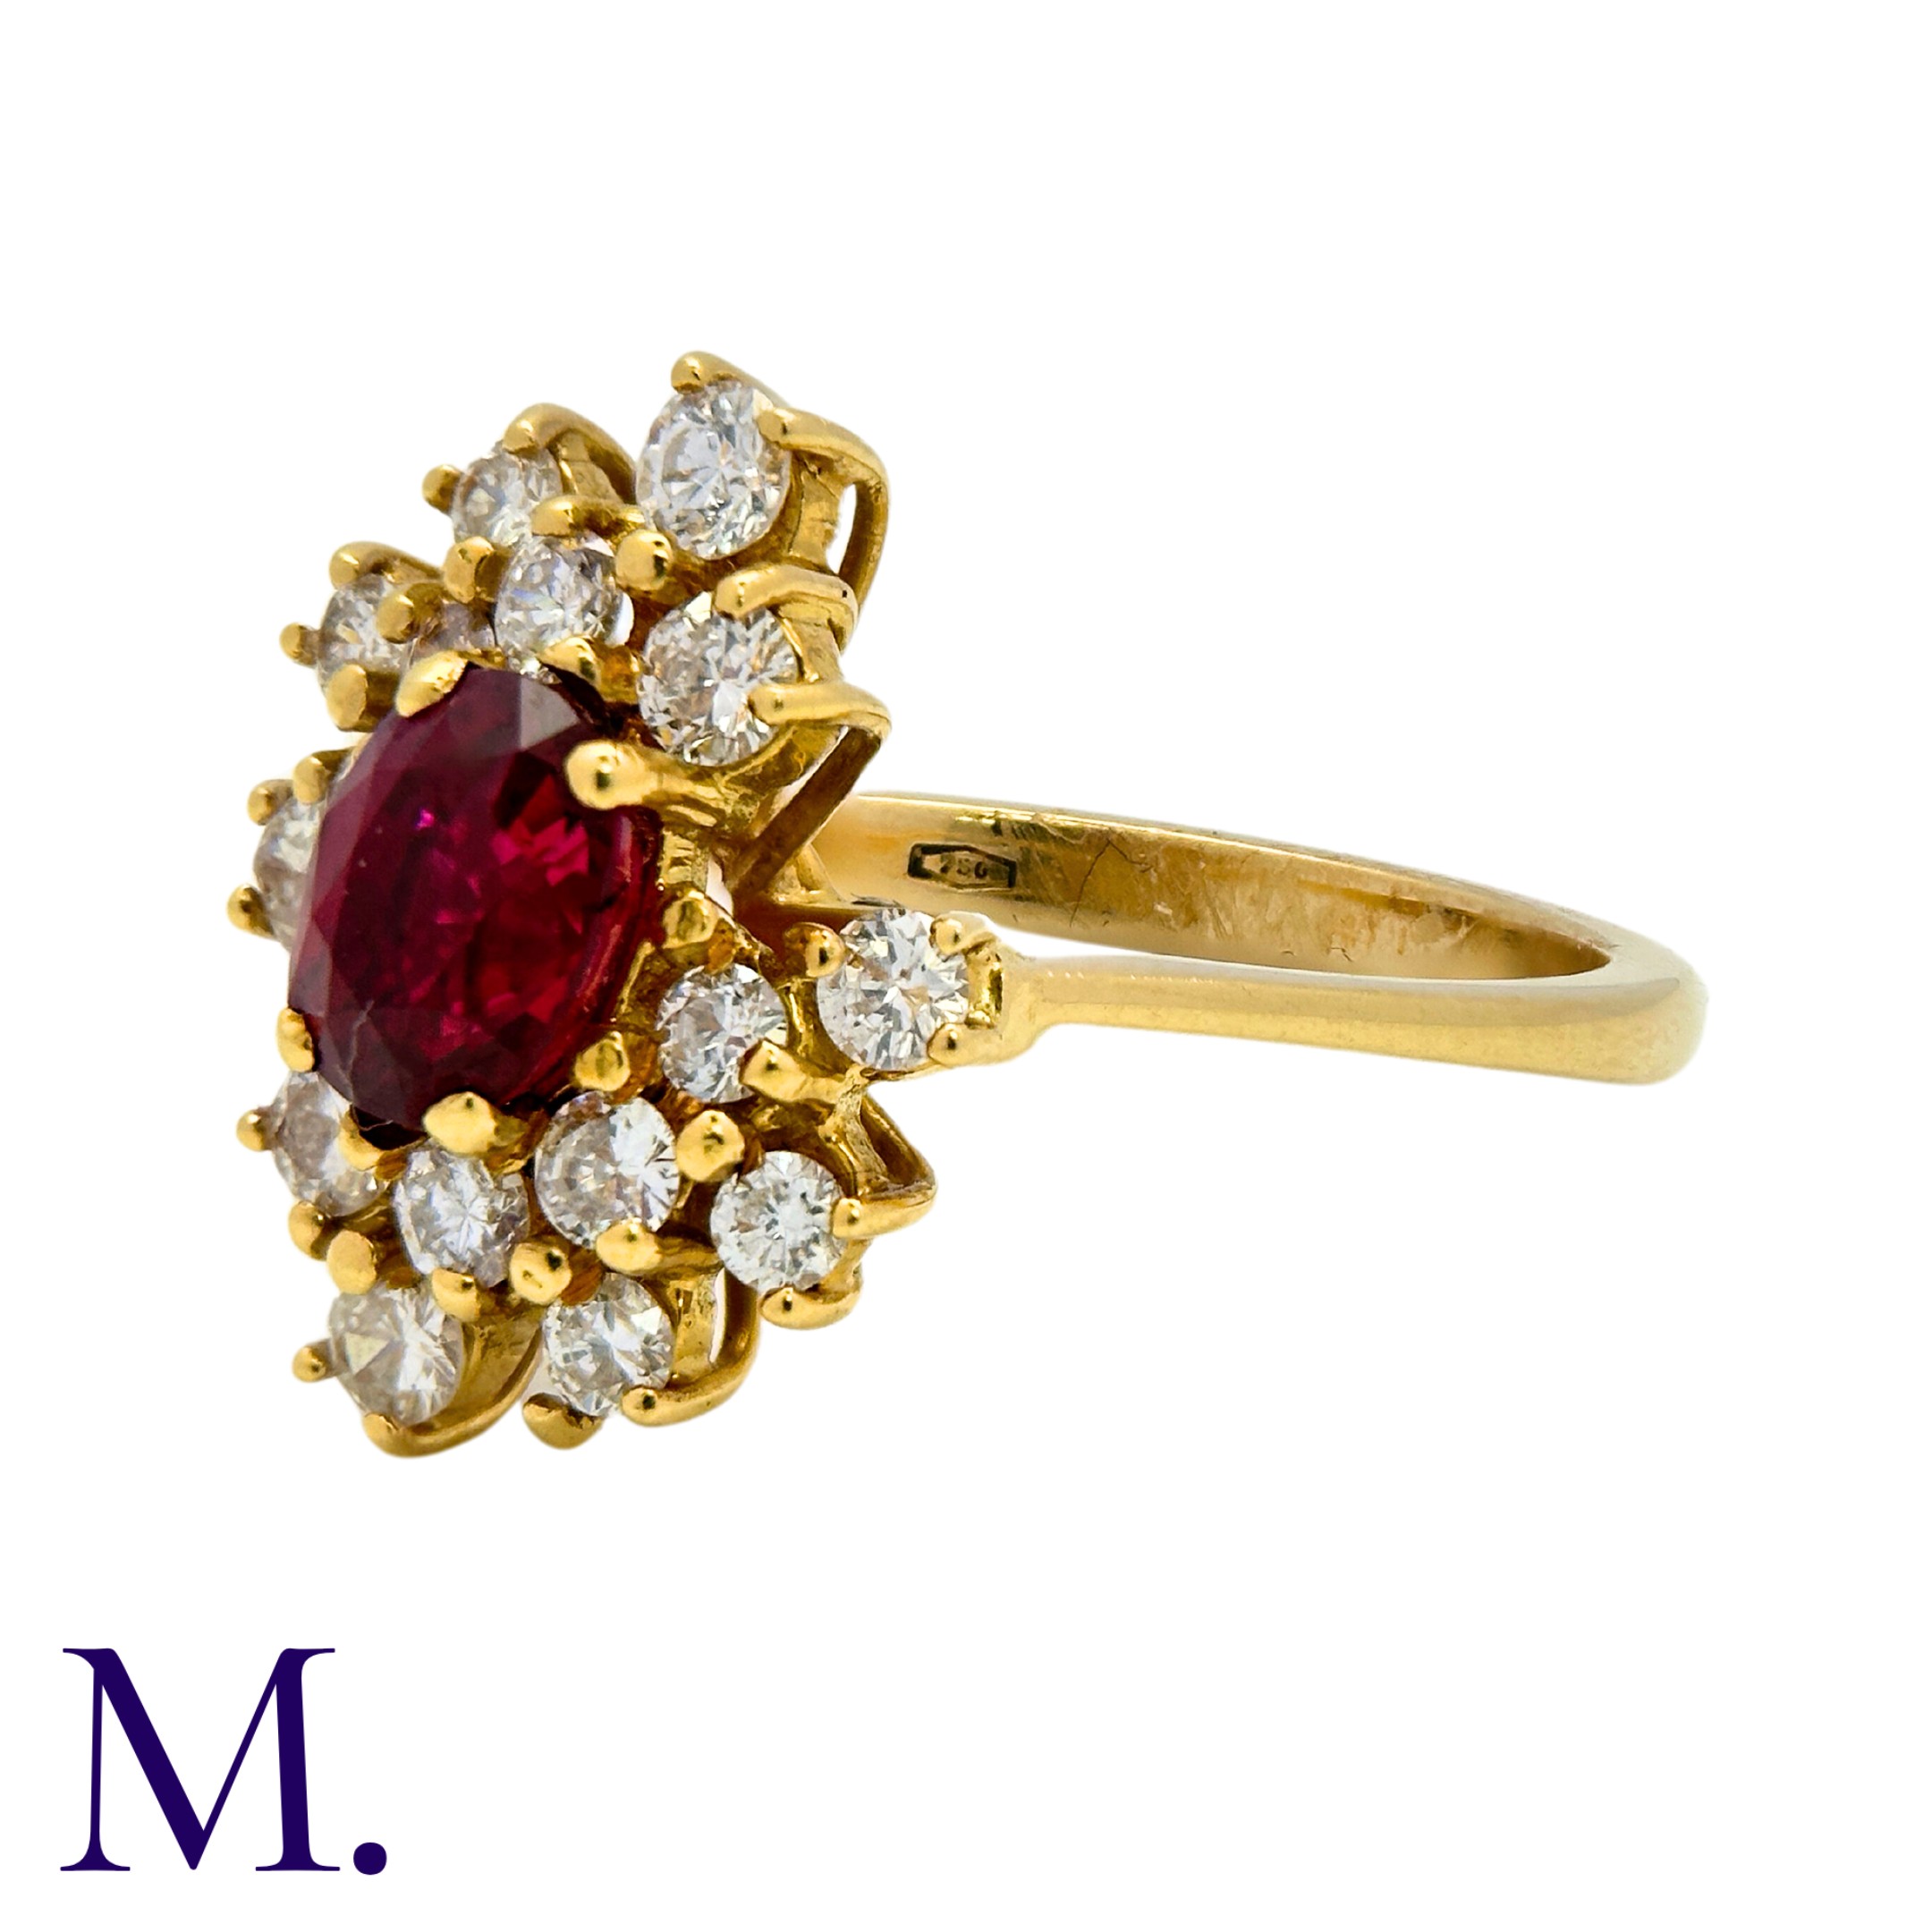 A Ruby and Diamond Ring in 18K yellow gold, set with an oval cut ruby of approximately 0.60ct to the - Image 2 of 3